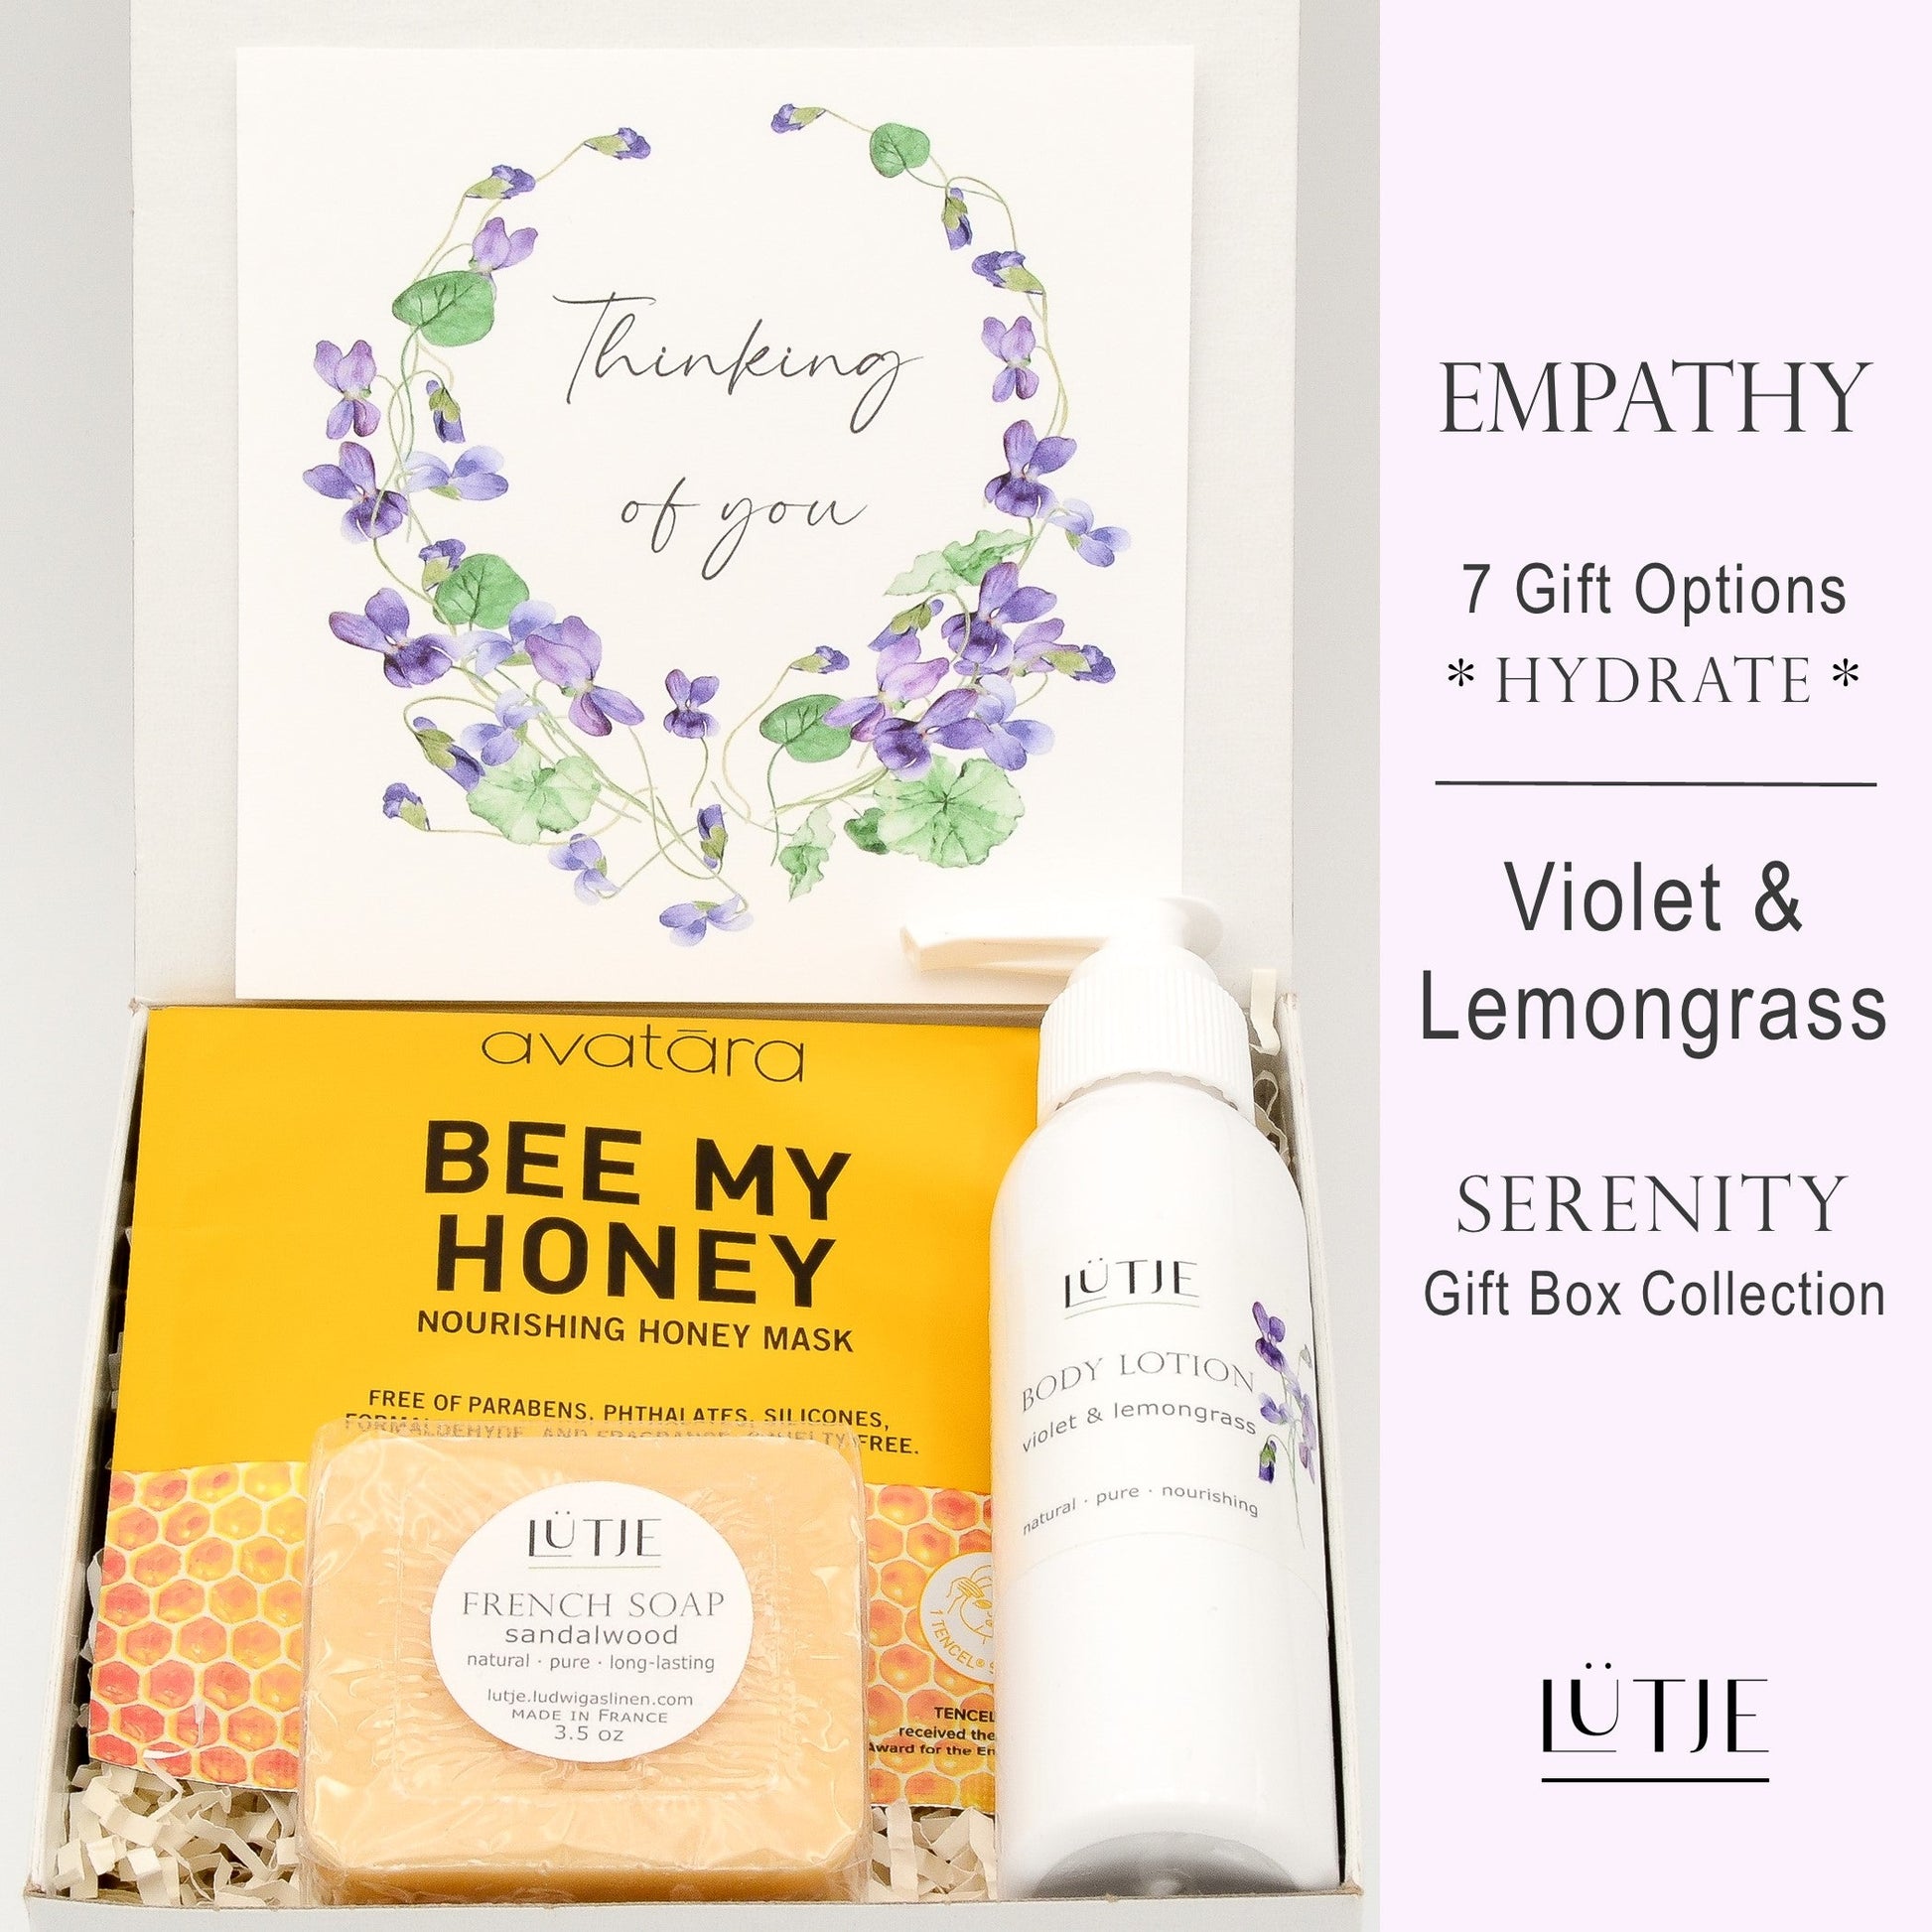 Gift Box for women, wife, daughter, BFF, sister, mom, or grandma, includes Violet & Lemongrass hand lotion spray and body lotion, essential oil, lip balm, soothing muscle balm, Bergamot & Pear room & linen spray, French soap, French bath salts, hydrating face mask, other bath, spa and self-care items, and 18K gold-plated necklace with engraved heart.